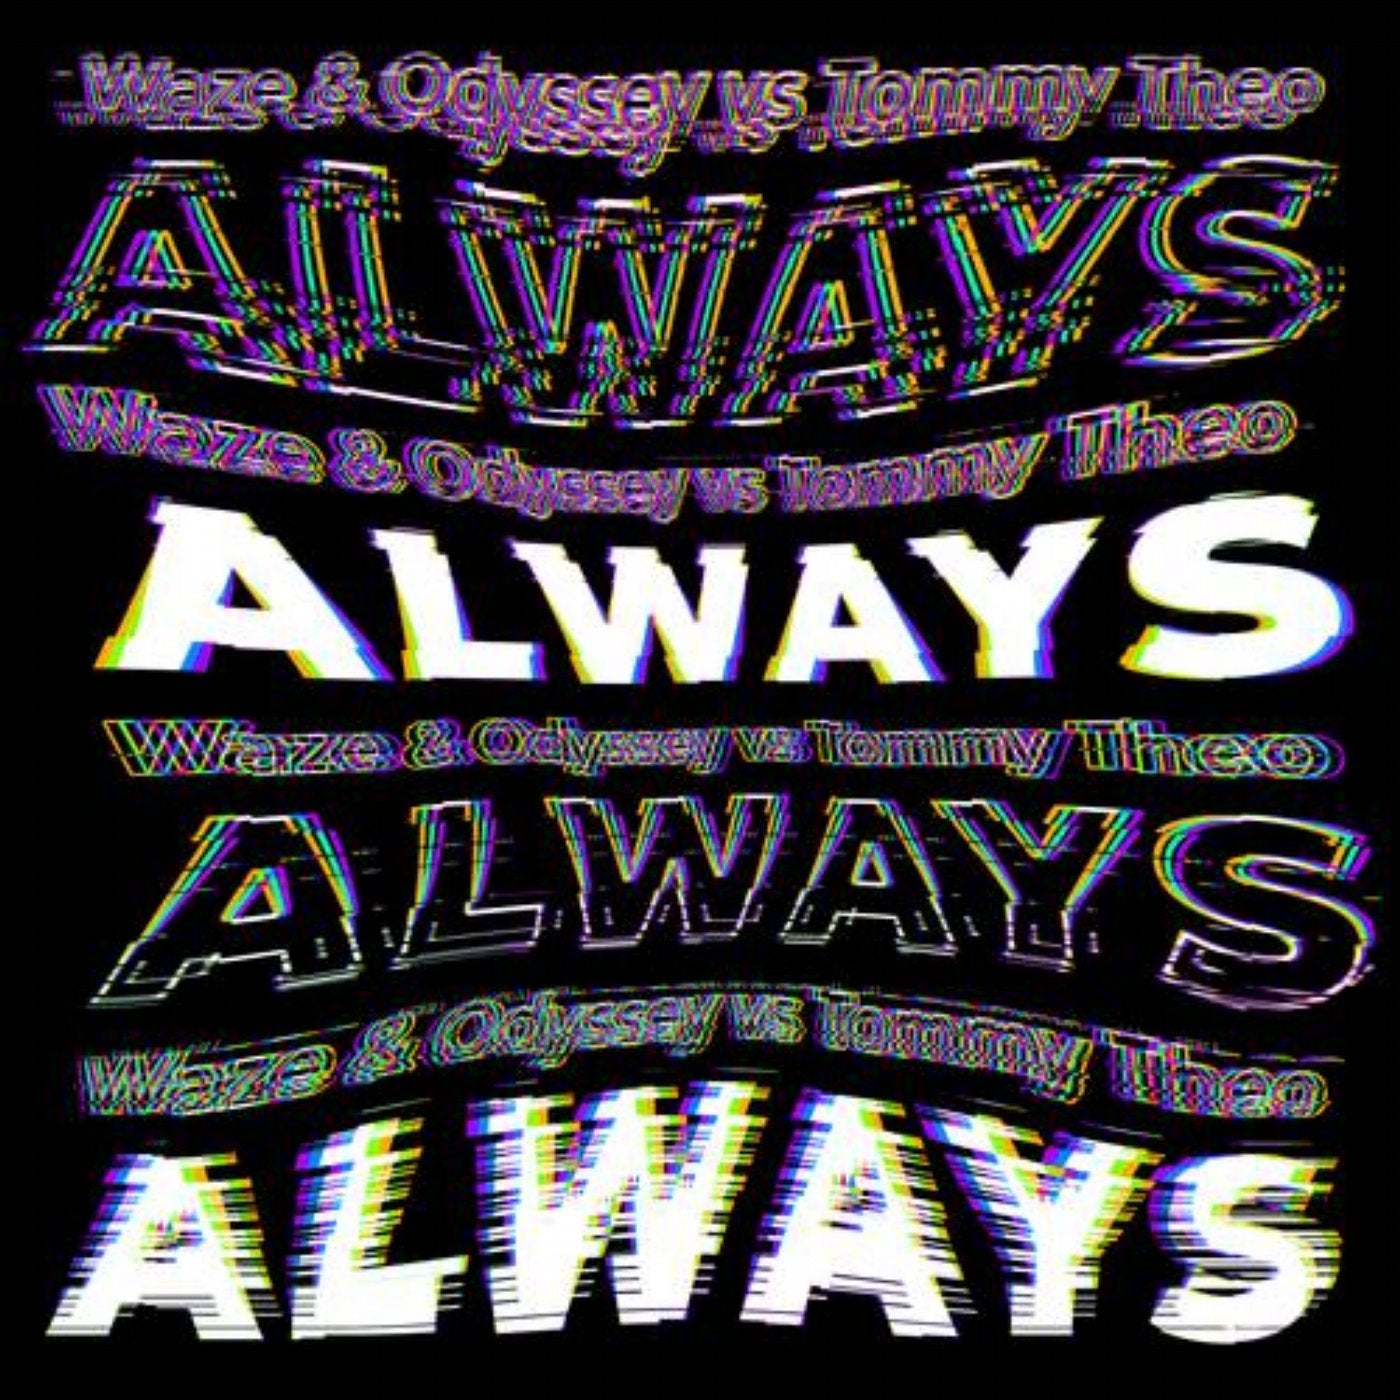 Always (Extended)